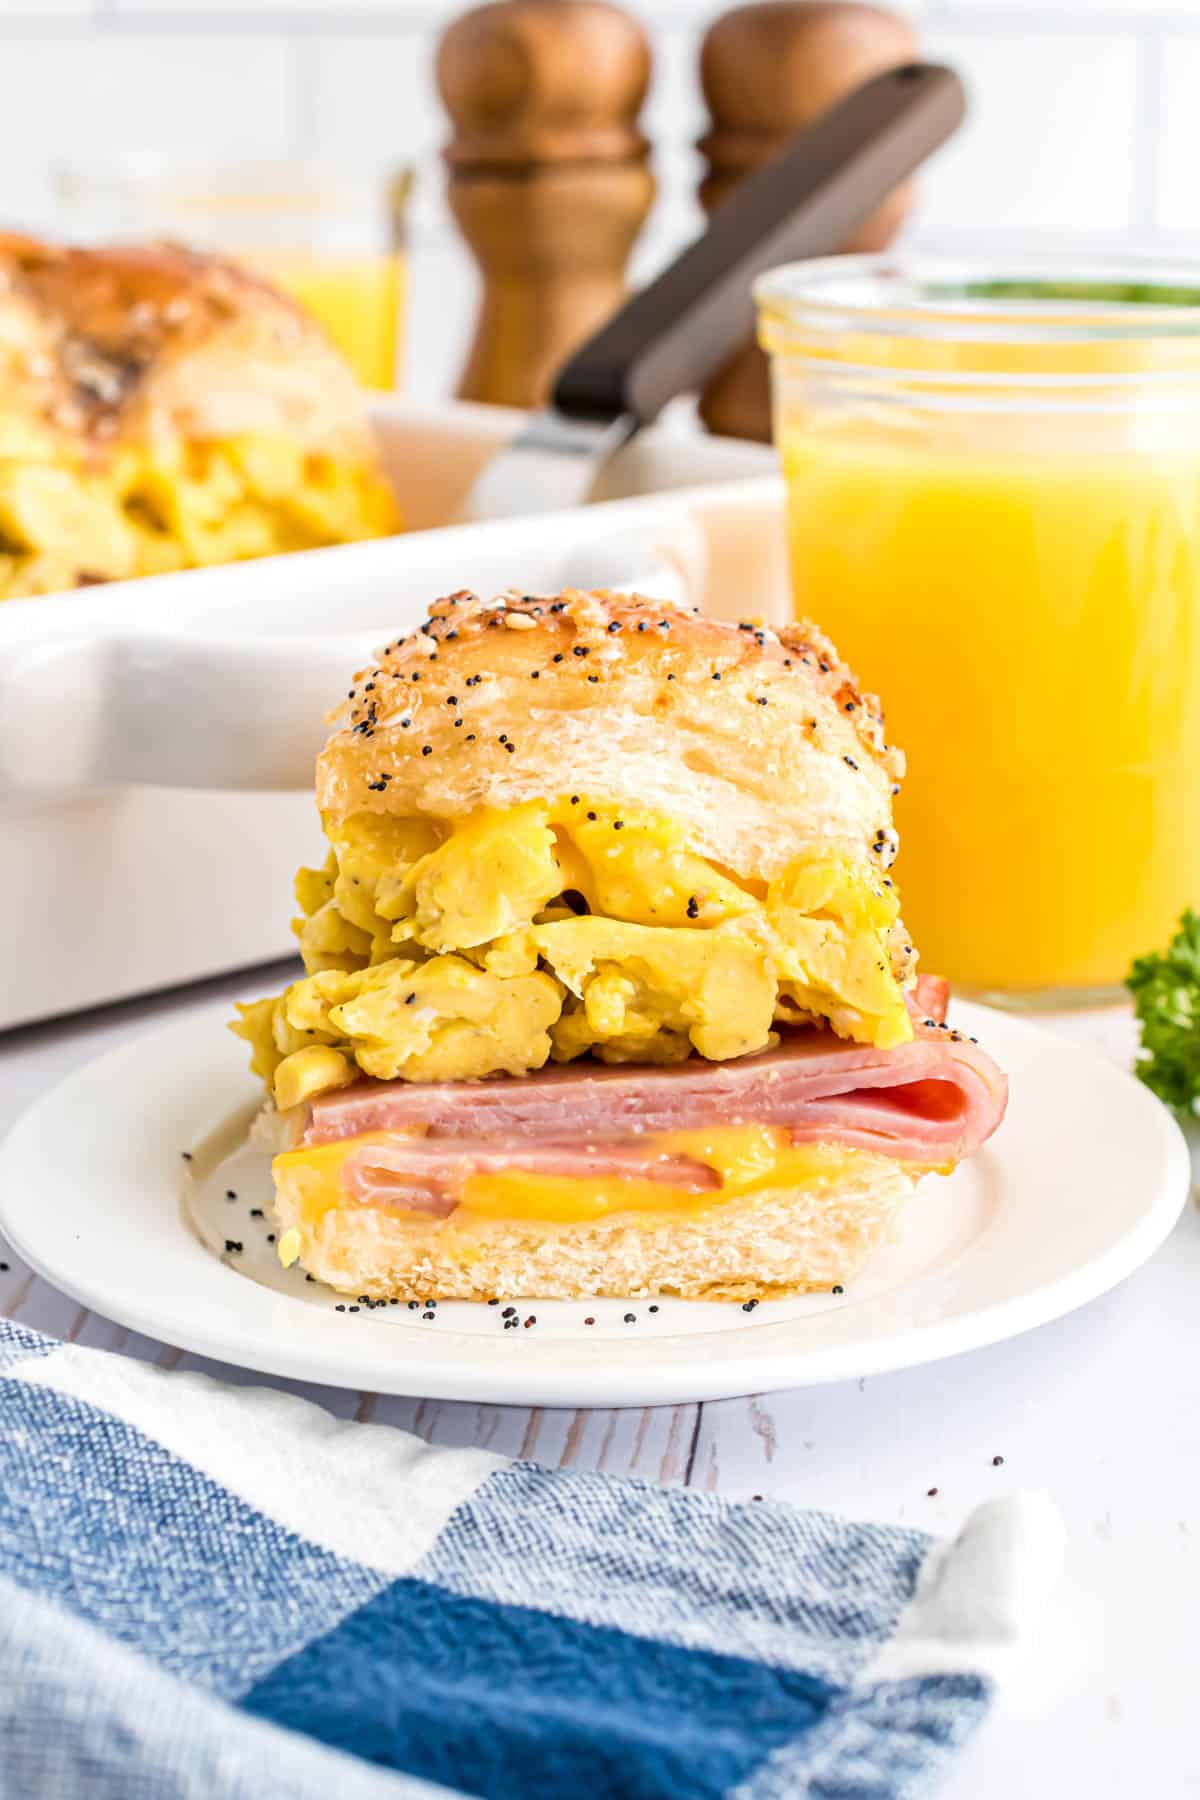 A ham, egg, and cheese breakfast slider in front of a glass of orange juice.